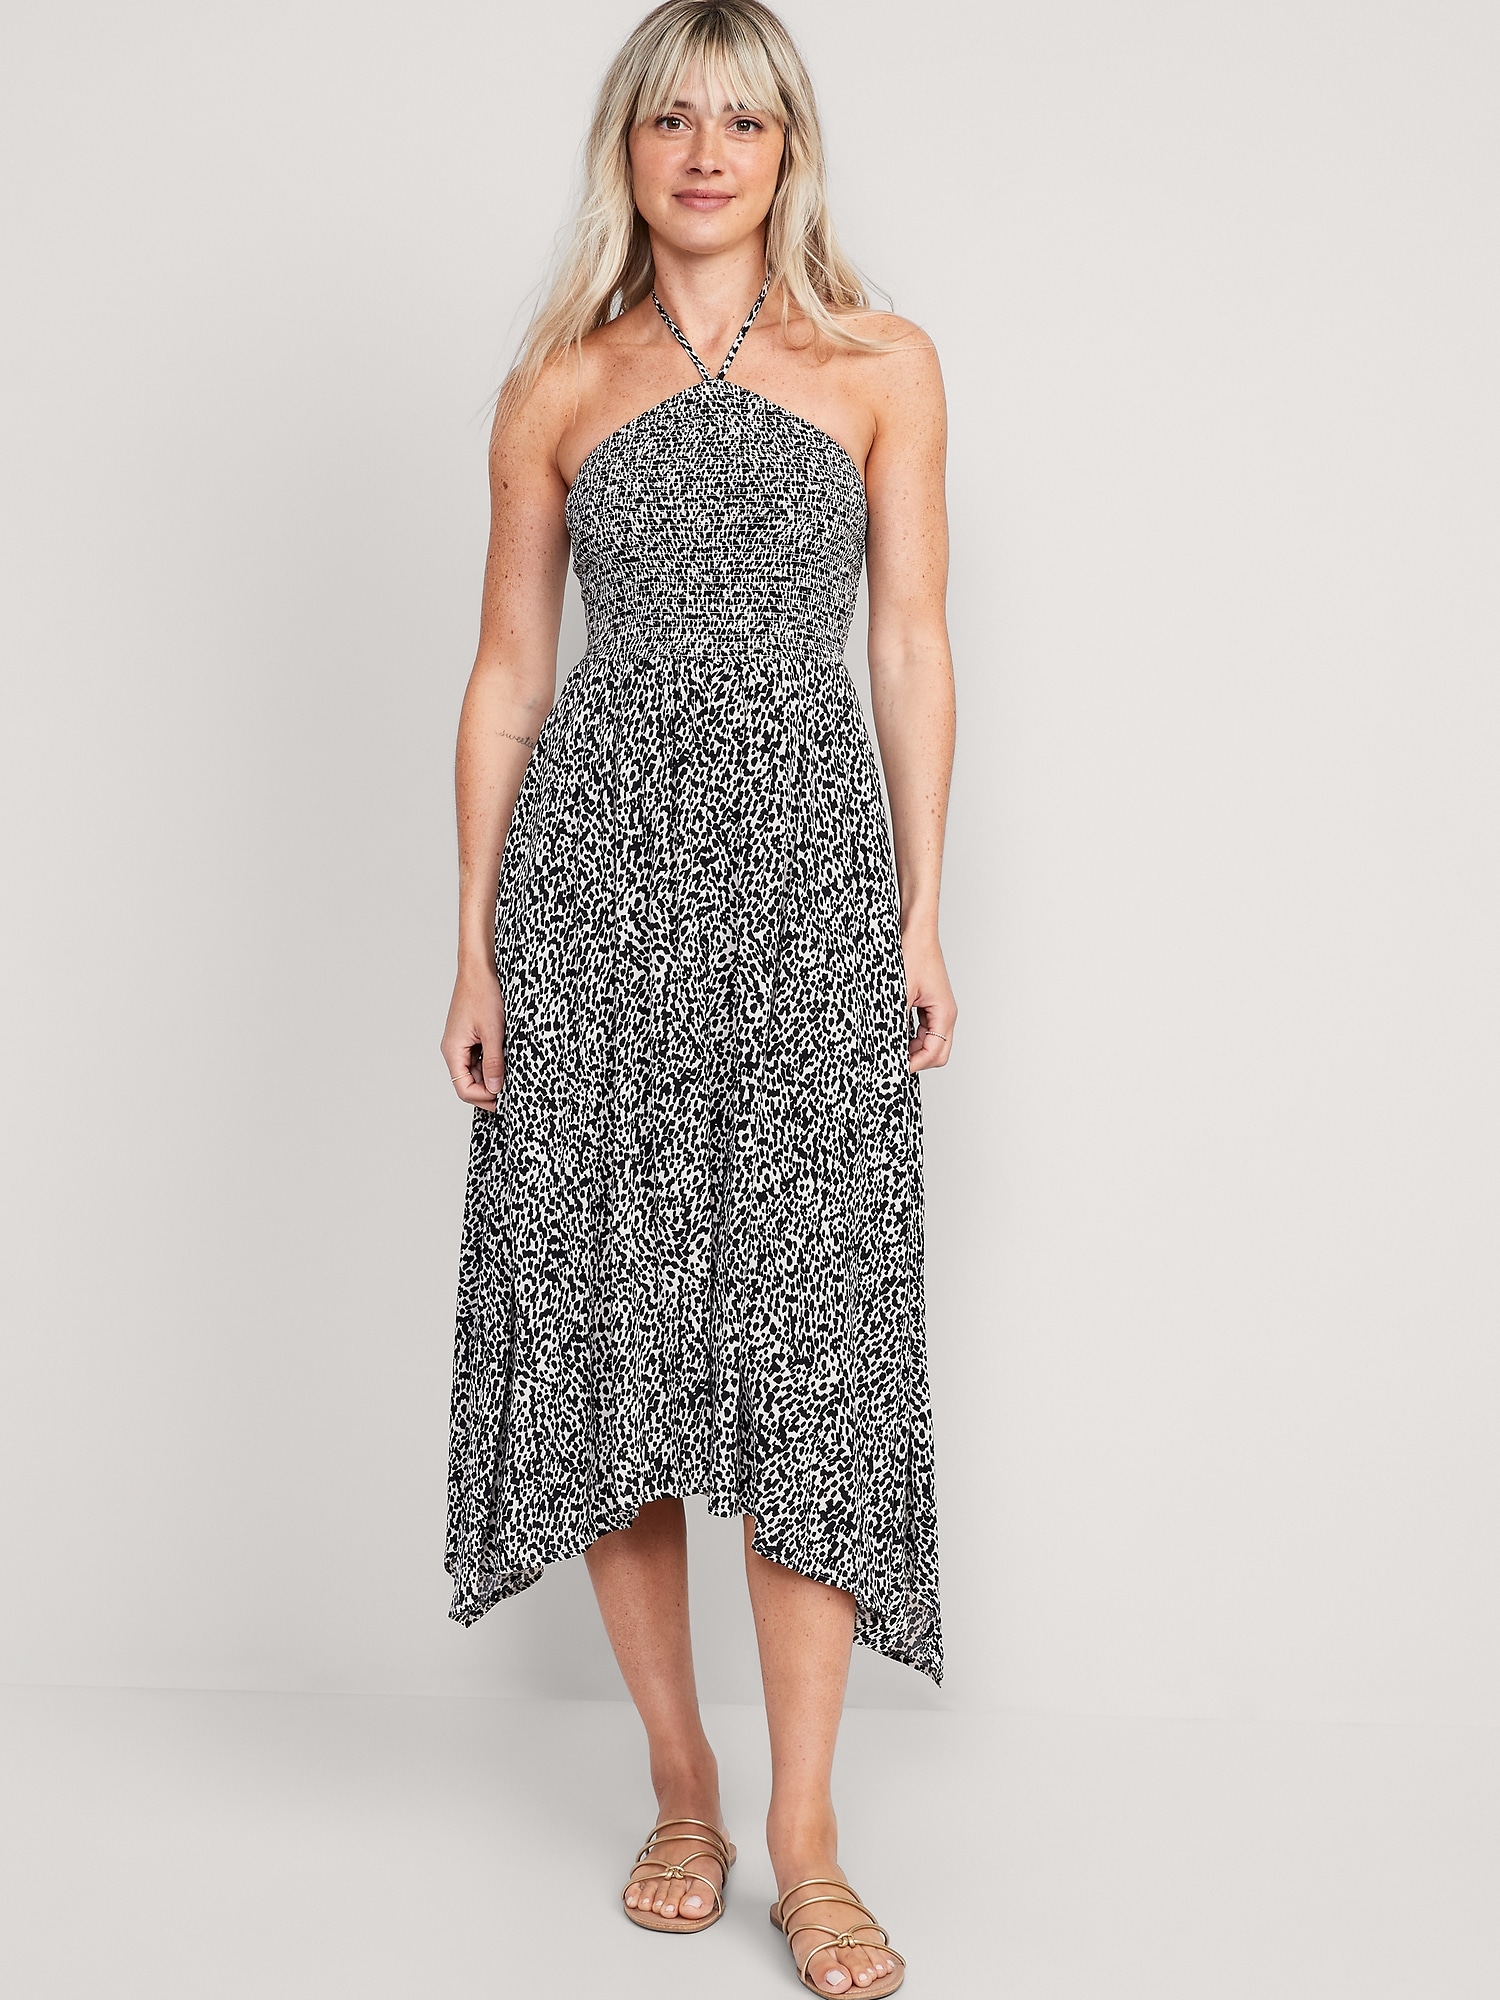 Women's Fit And Flare Midi Dresses | Old Navy